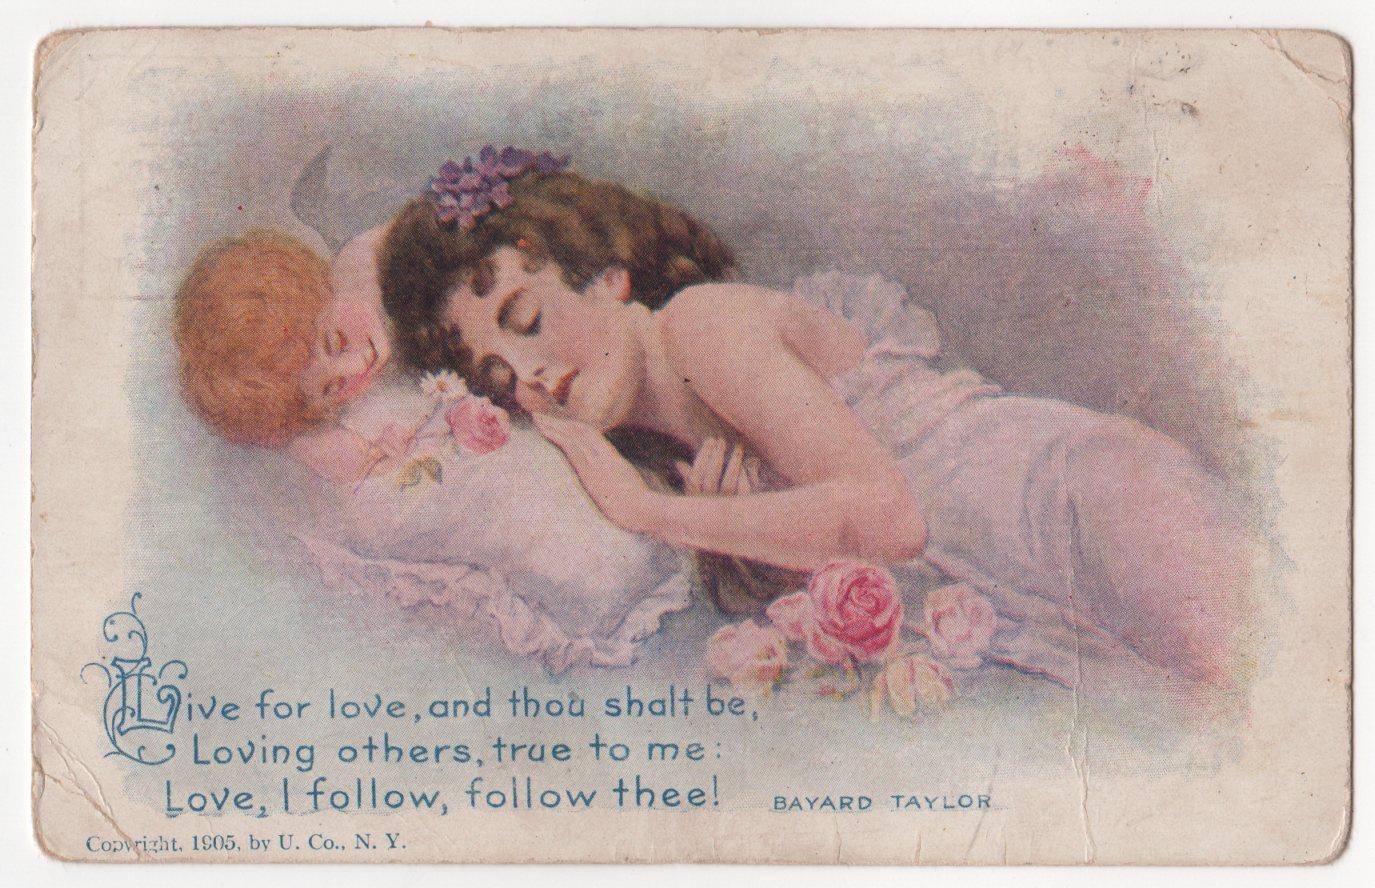 Live For Love - poetry by Bayard Taylor - circa 1905 postcard